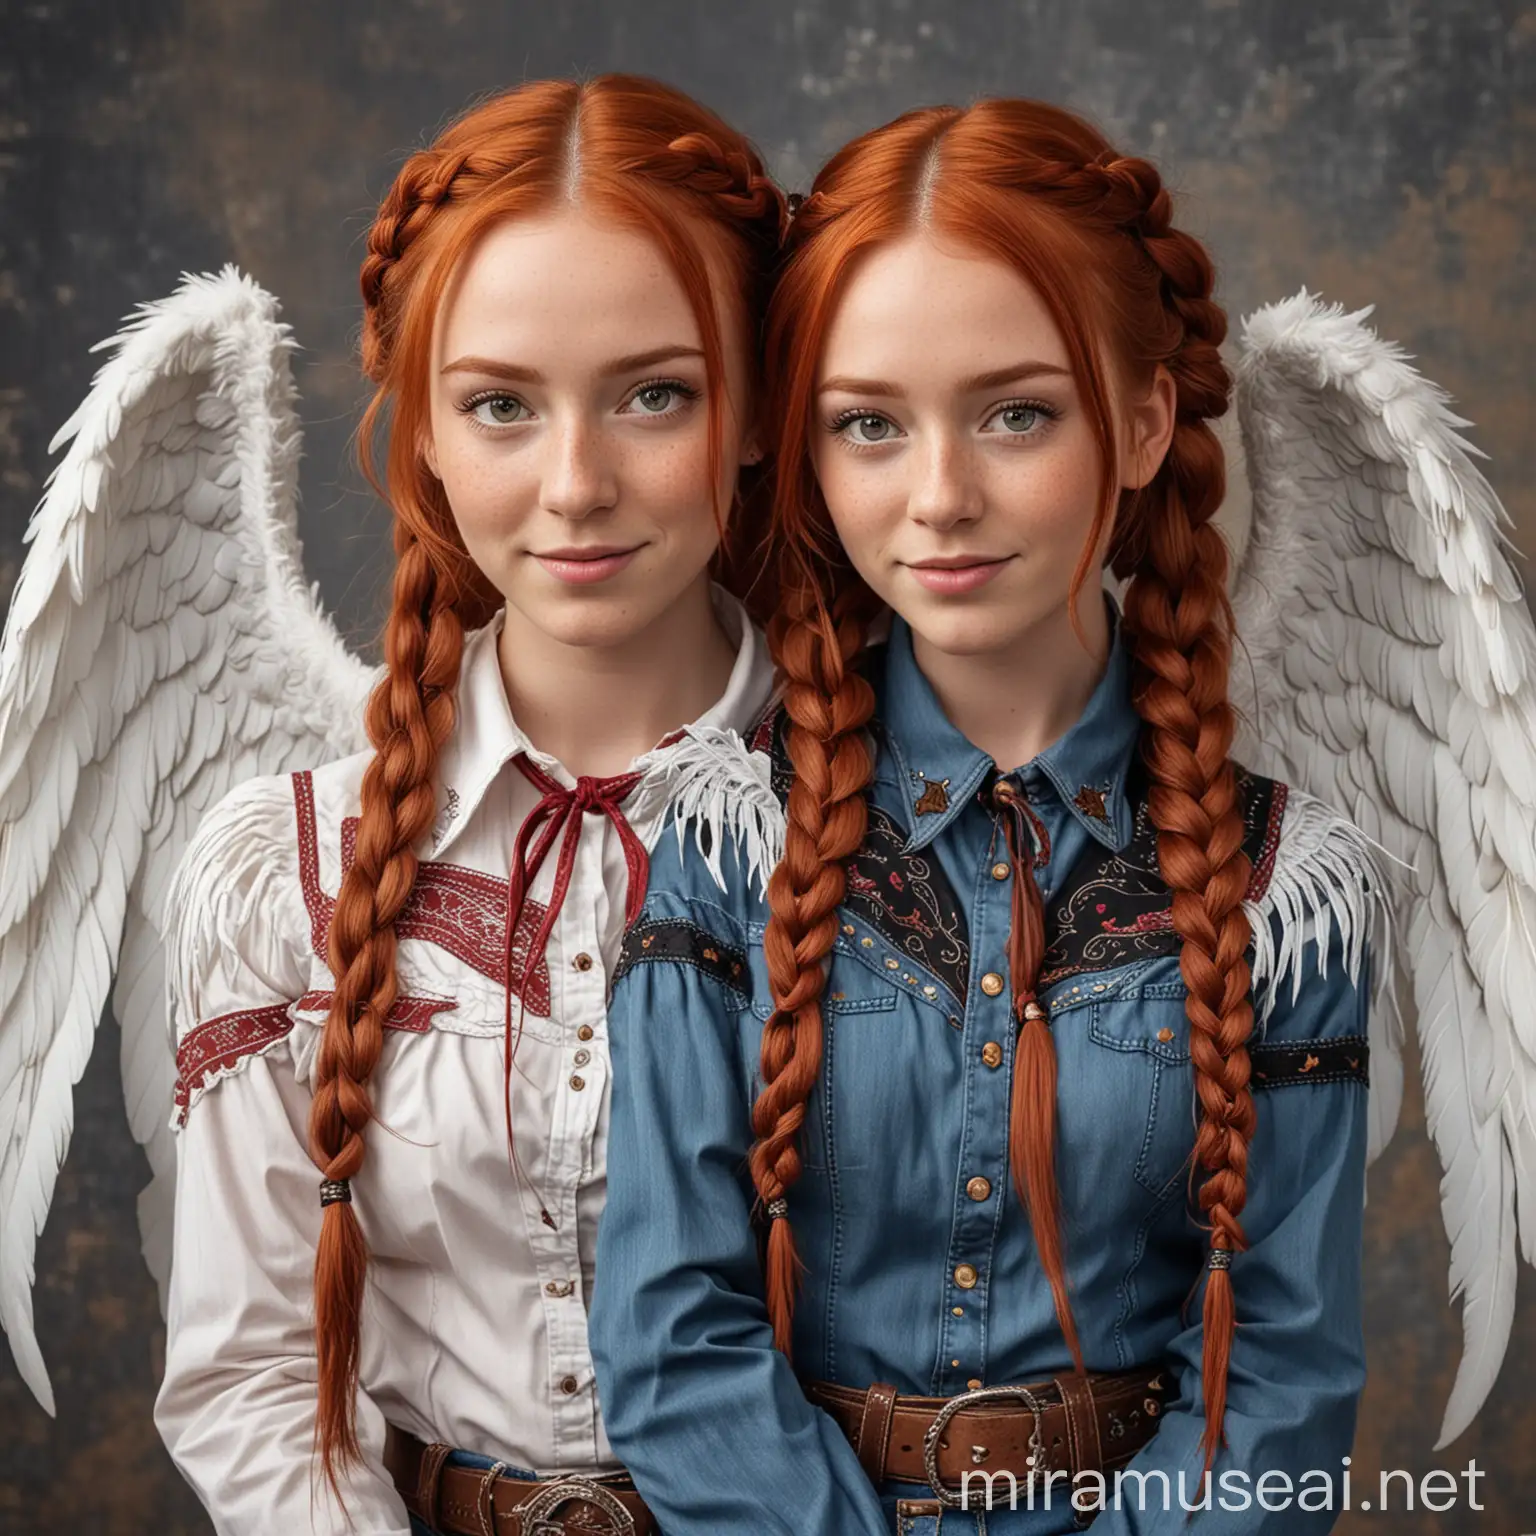 Far West, Cowgirl with a beautiful freckled face and red hair in two long pigtail braids, wears a cowboy shirt and has white angel wings next to her friend, the friend has black hair and black angel wings